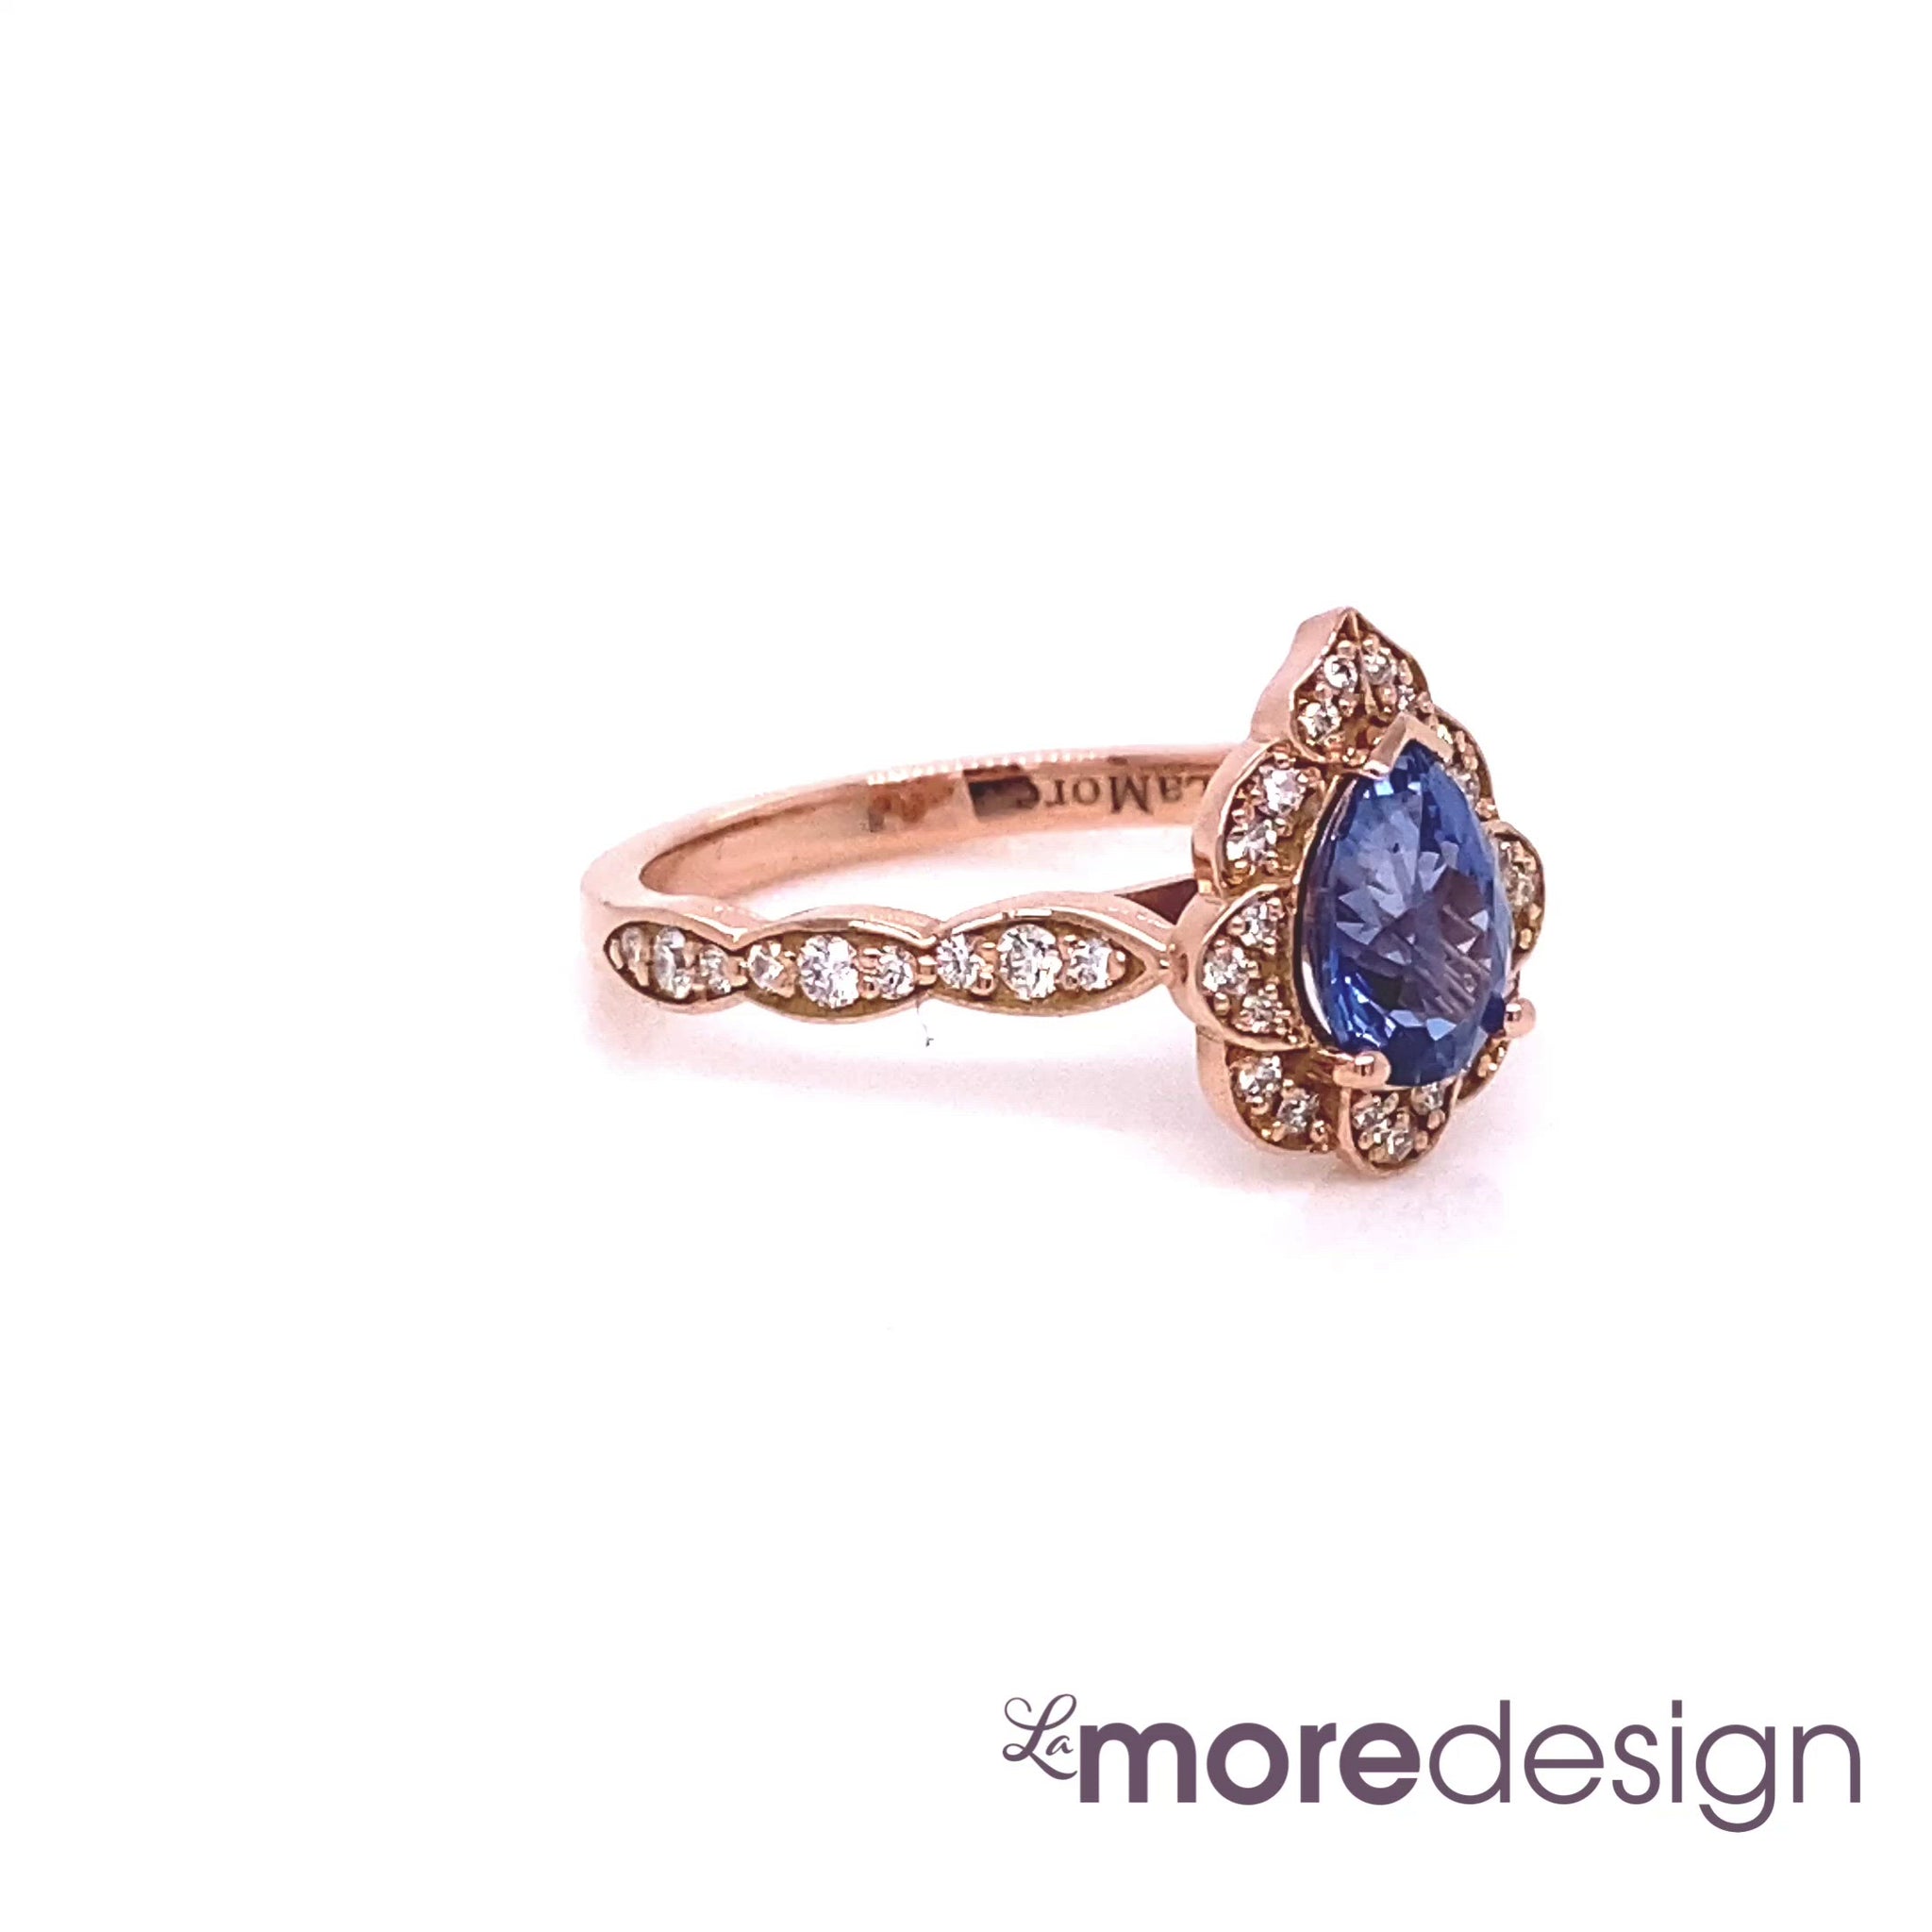 This breathtakingly gorgeous sapphire engagement ring is crafted in 14k rose gold vintage floral diamond ring setting with a 1.25-carat pear cut natural blue sapphire center ~ total gemstone and diamond weight of the whole ring is 1.57 ct.tw. This unique yet elegant vintage-inspired pear-cut engagement ring will guarantee a big smile on your future bride's face! All our wedding bands can pair beautifully with this gorgeous vintage floral diamond sapphire ring!